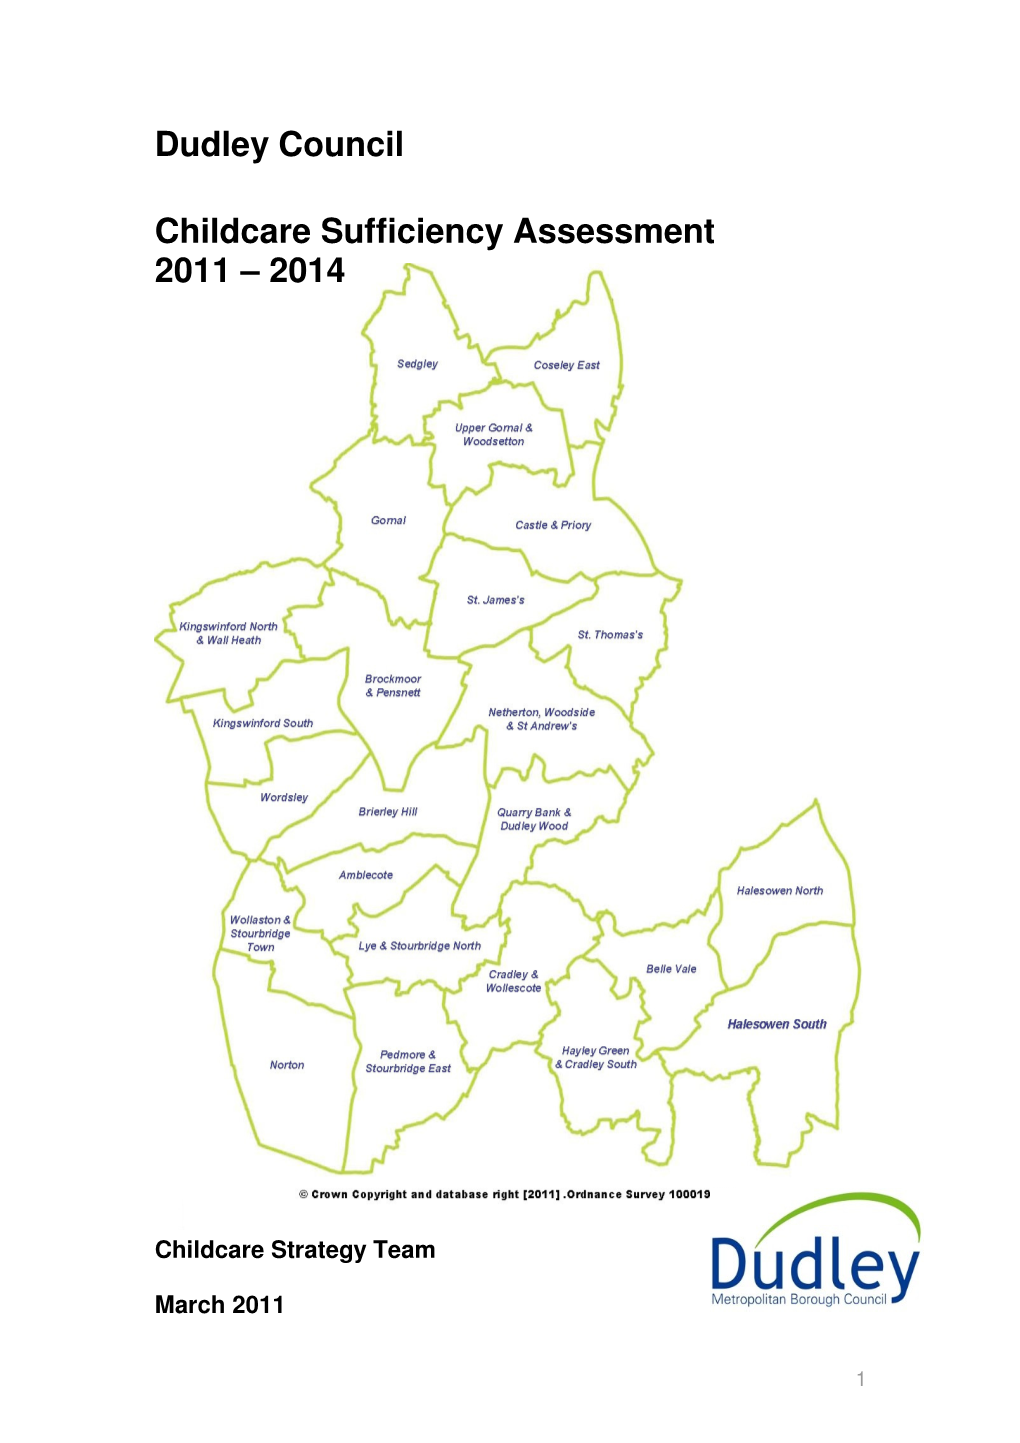 Dudley Council Childcare Sufficiency Assessment